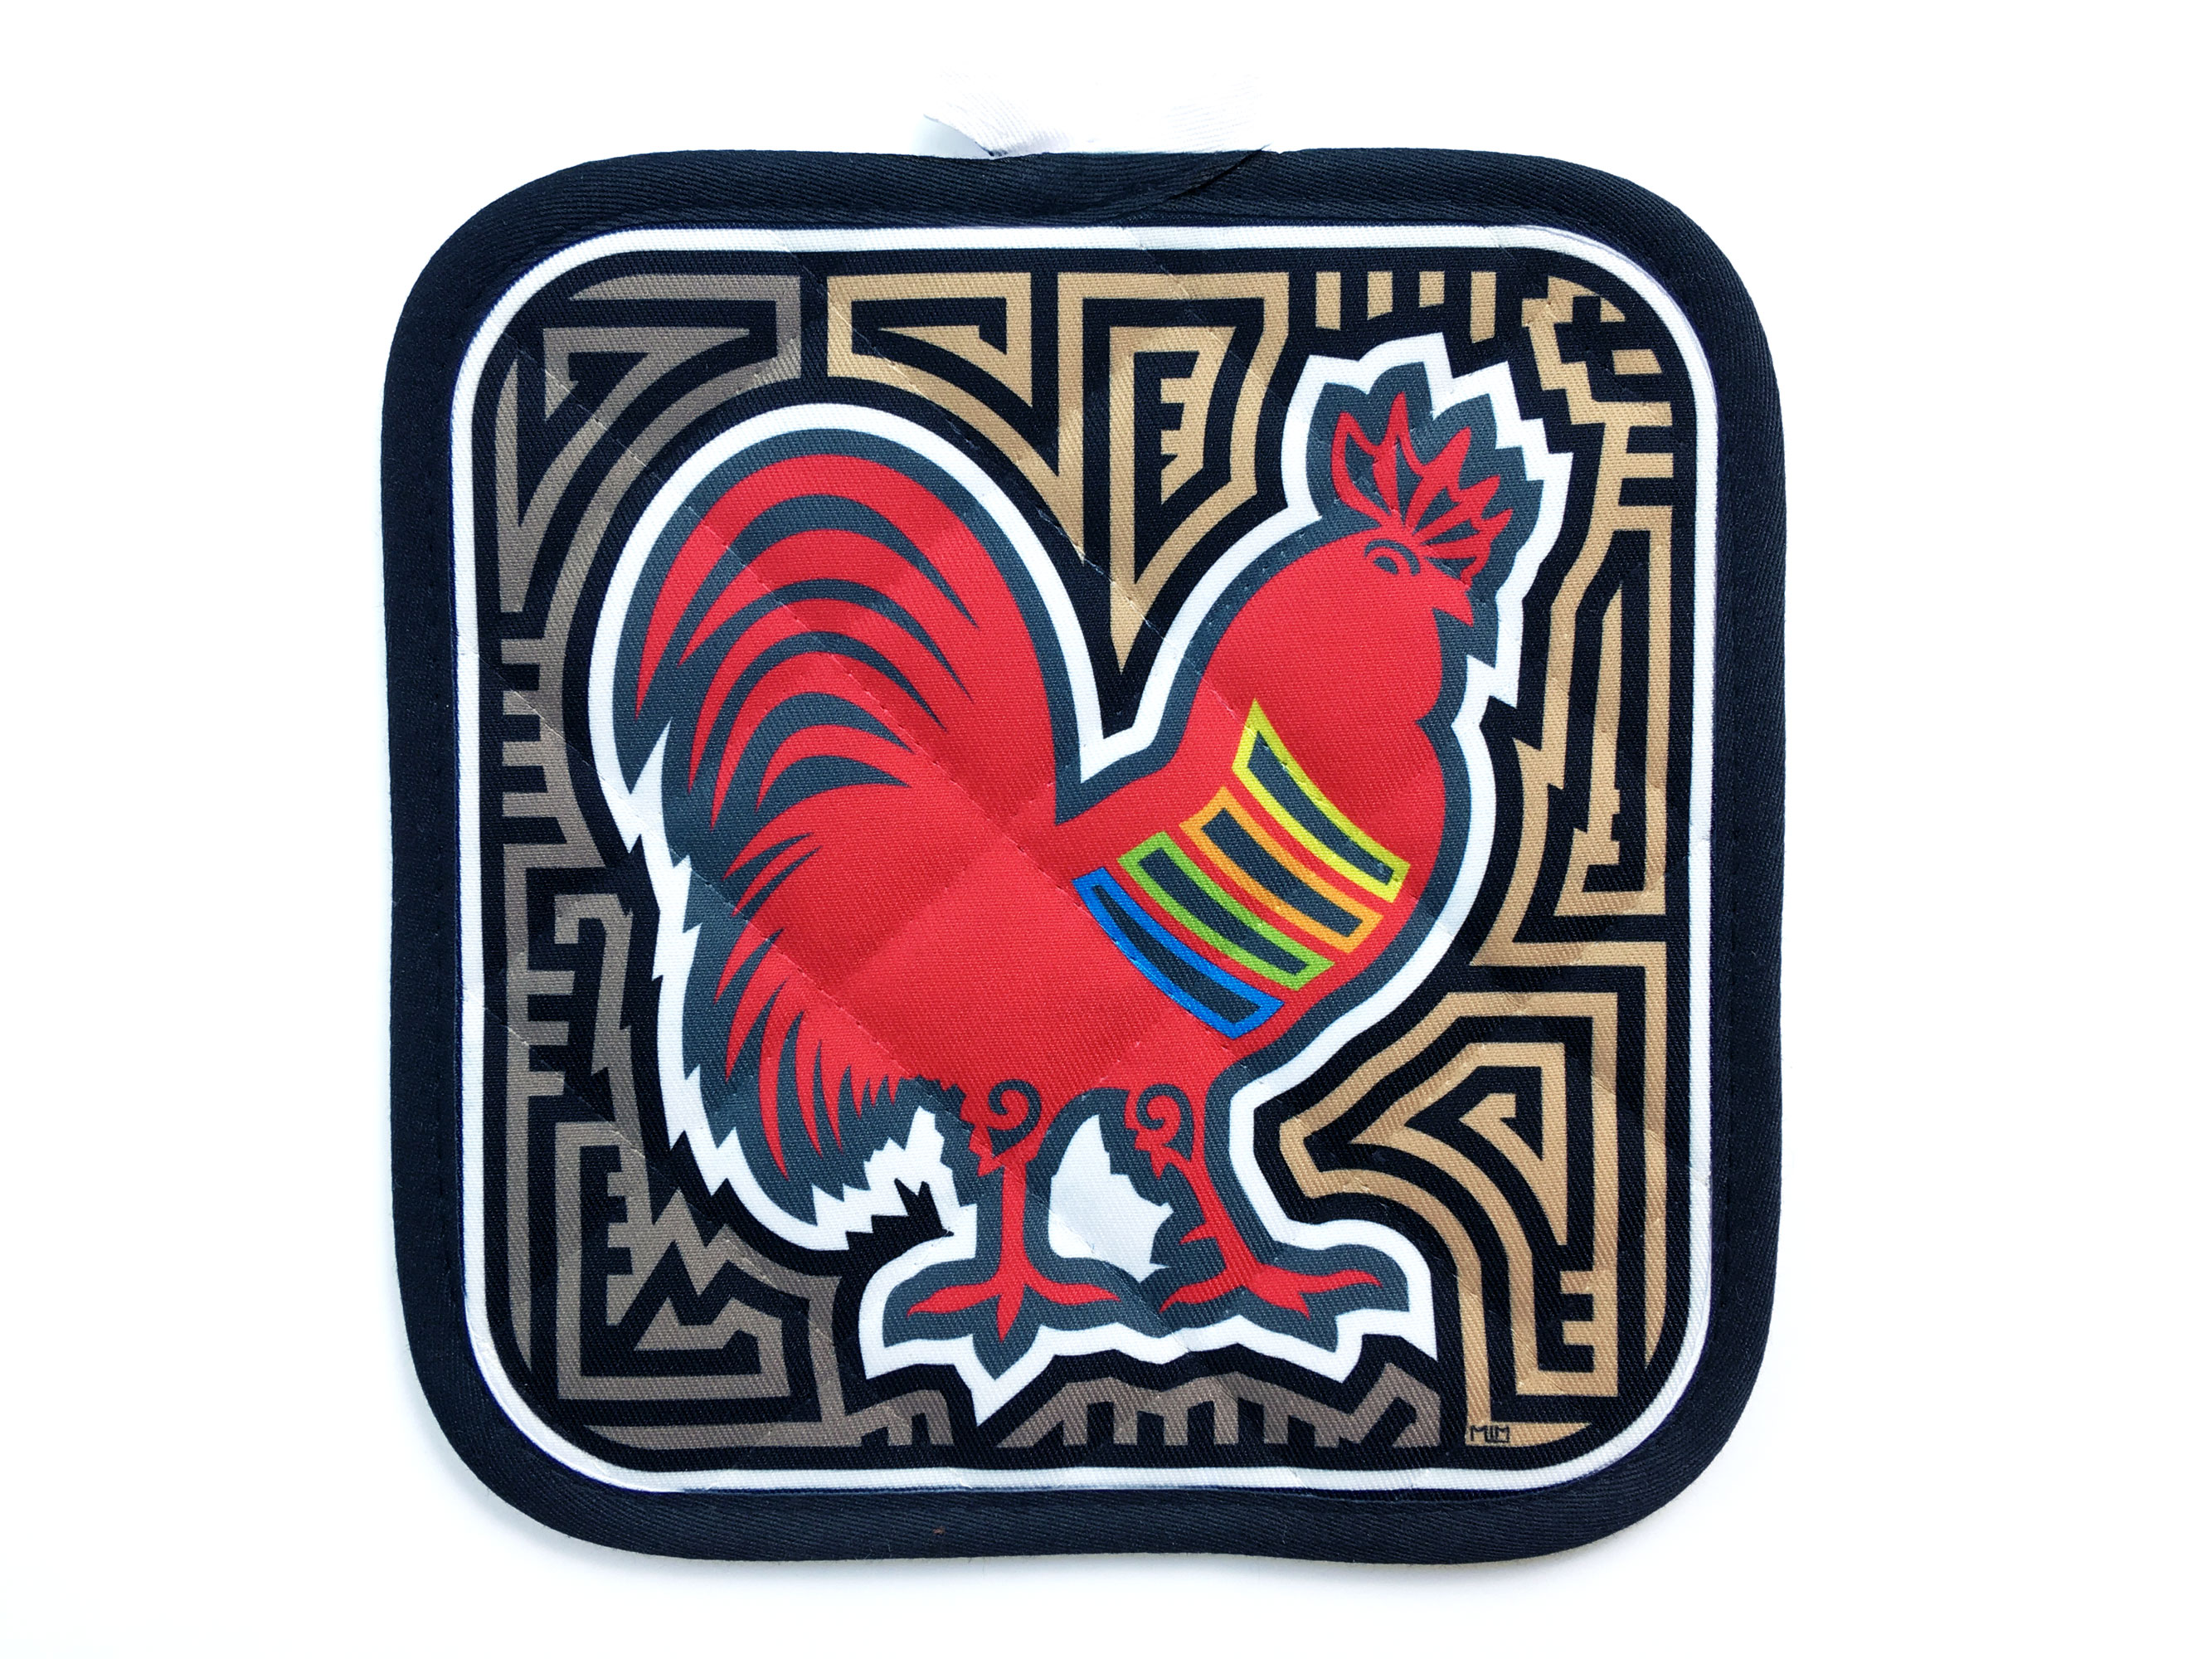 Red Rooster Pot Holder made with sublimation printing